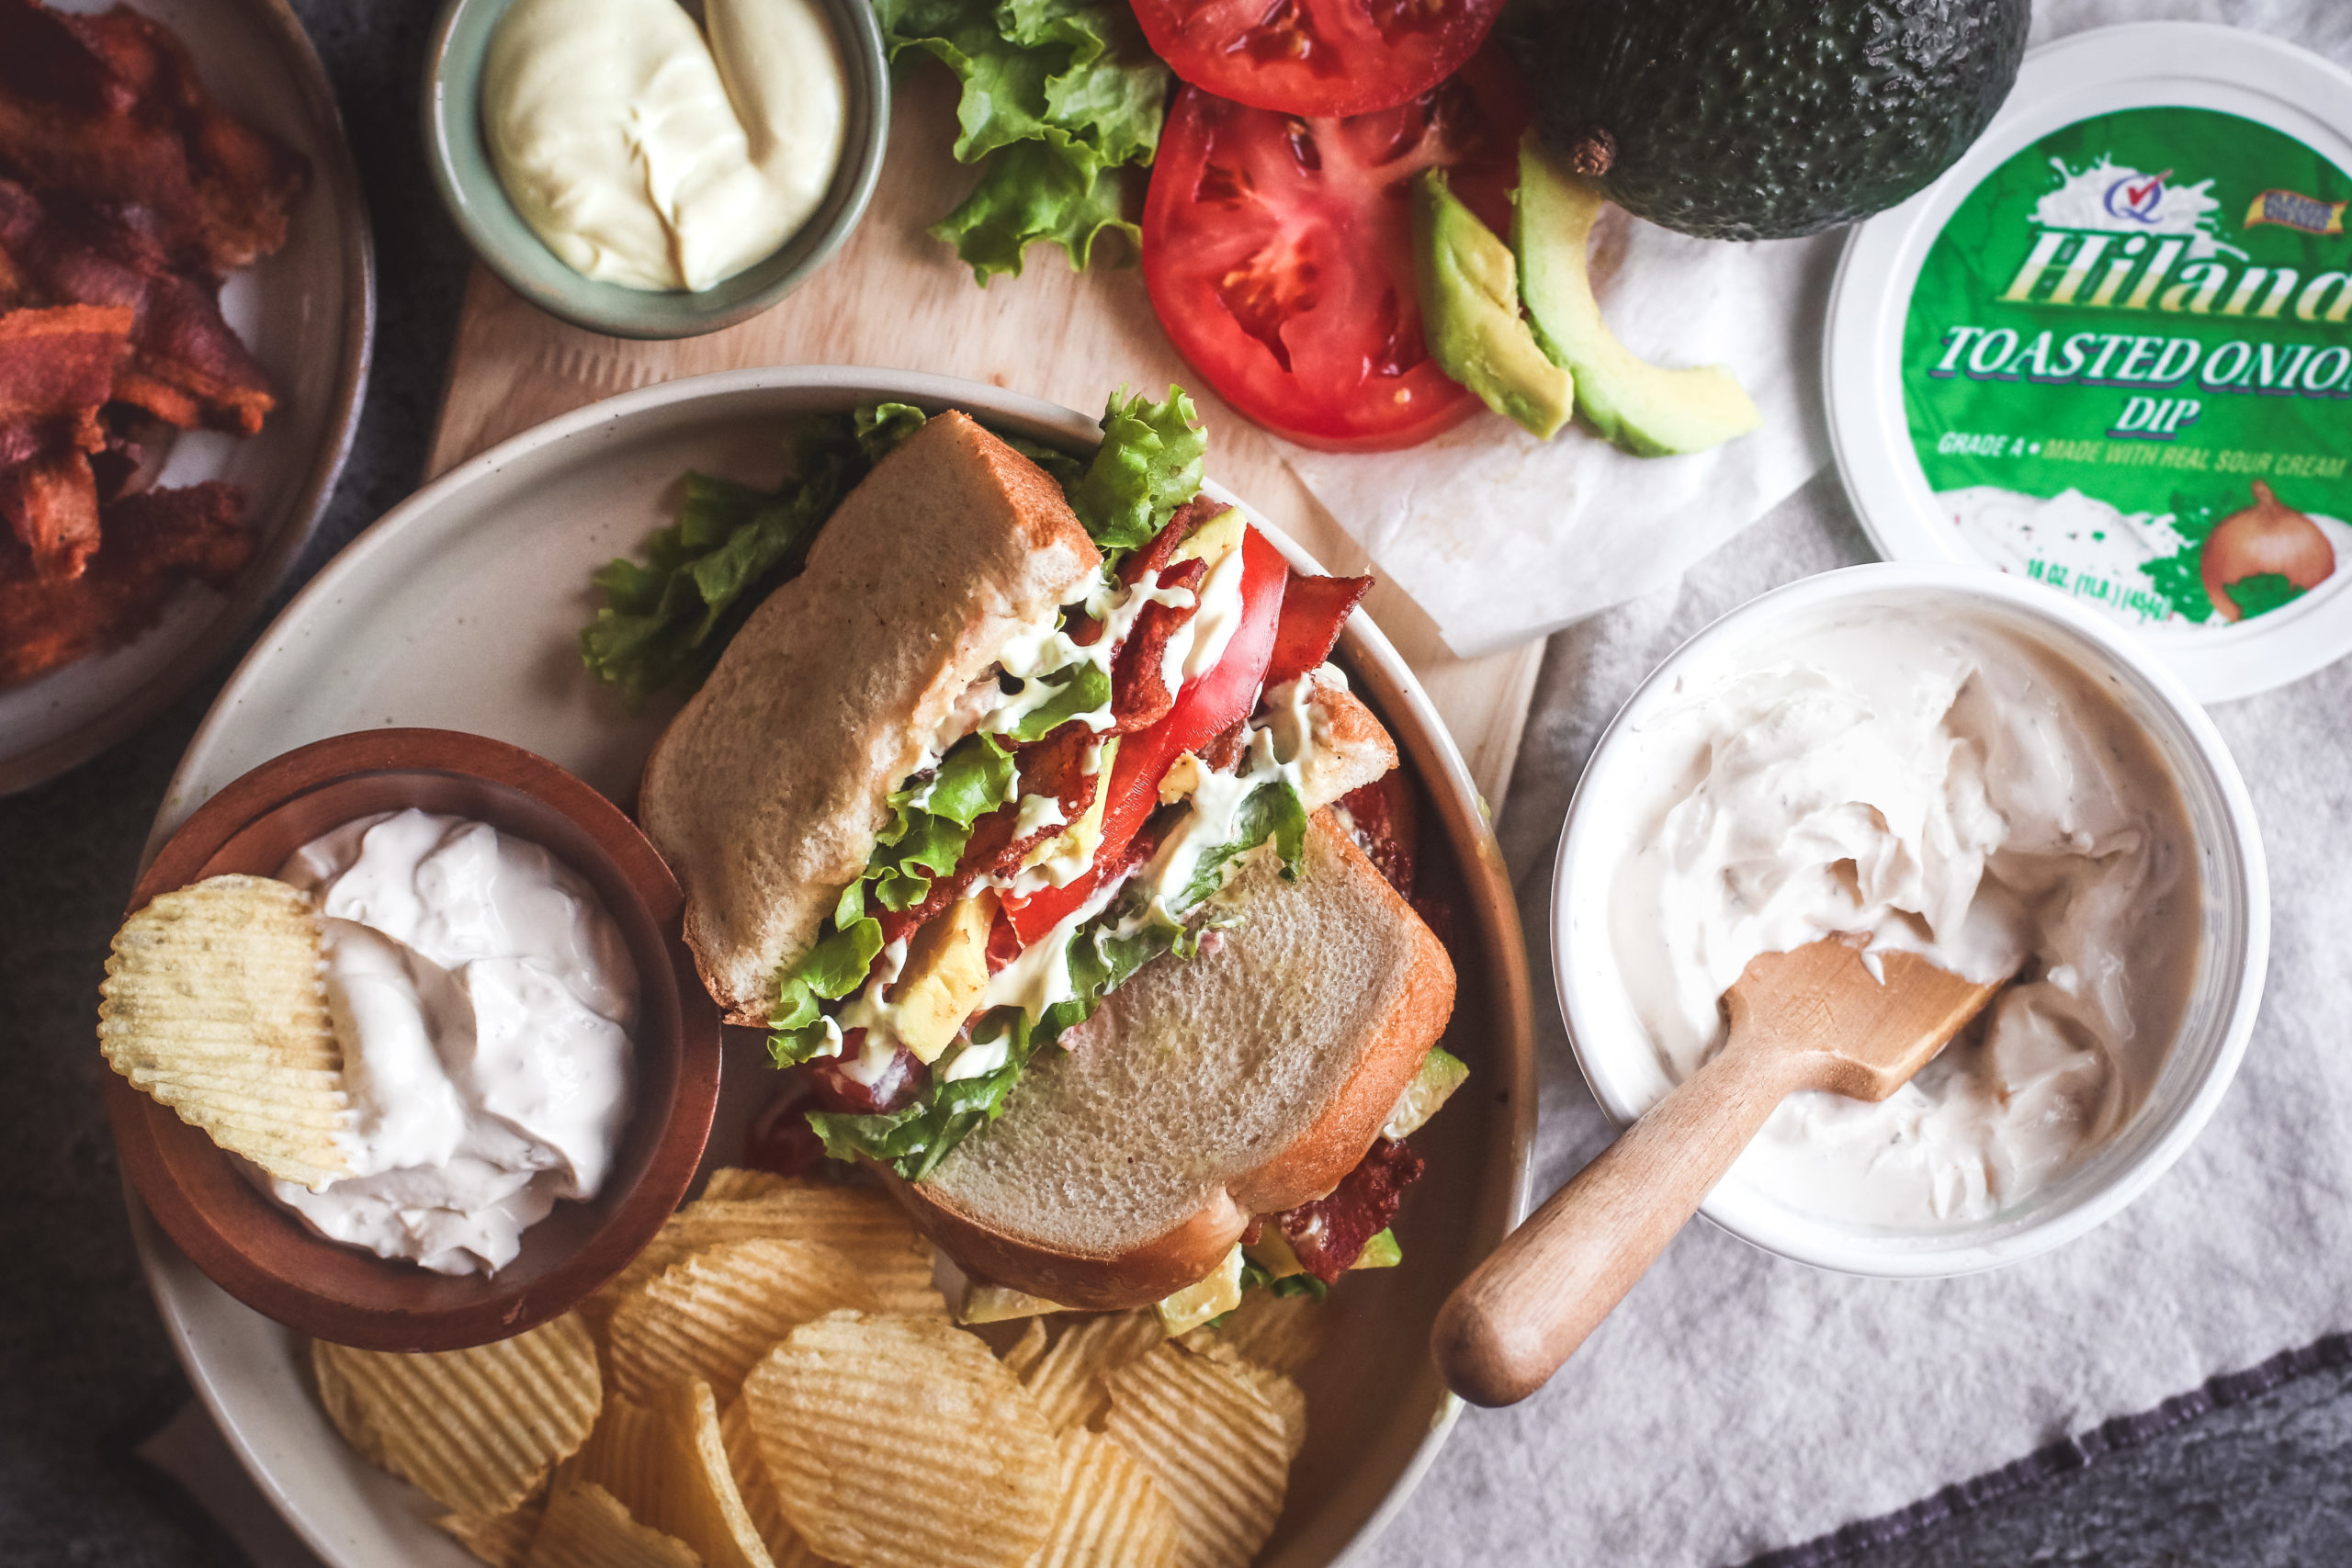 Overhead view of a BLT sandwich with sour cream spread